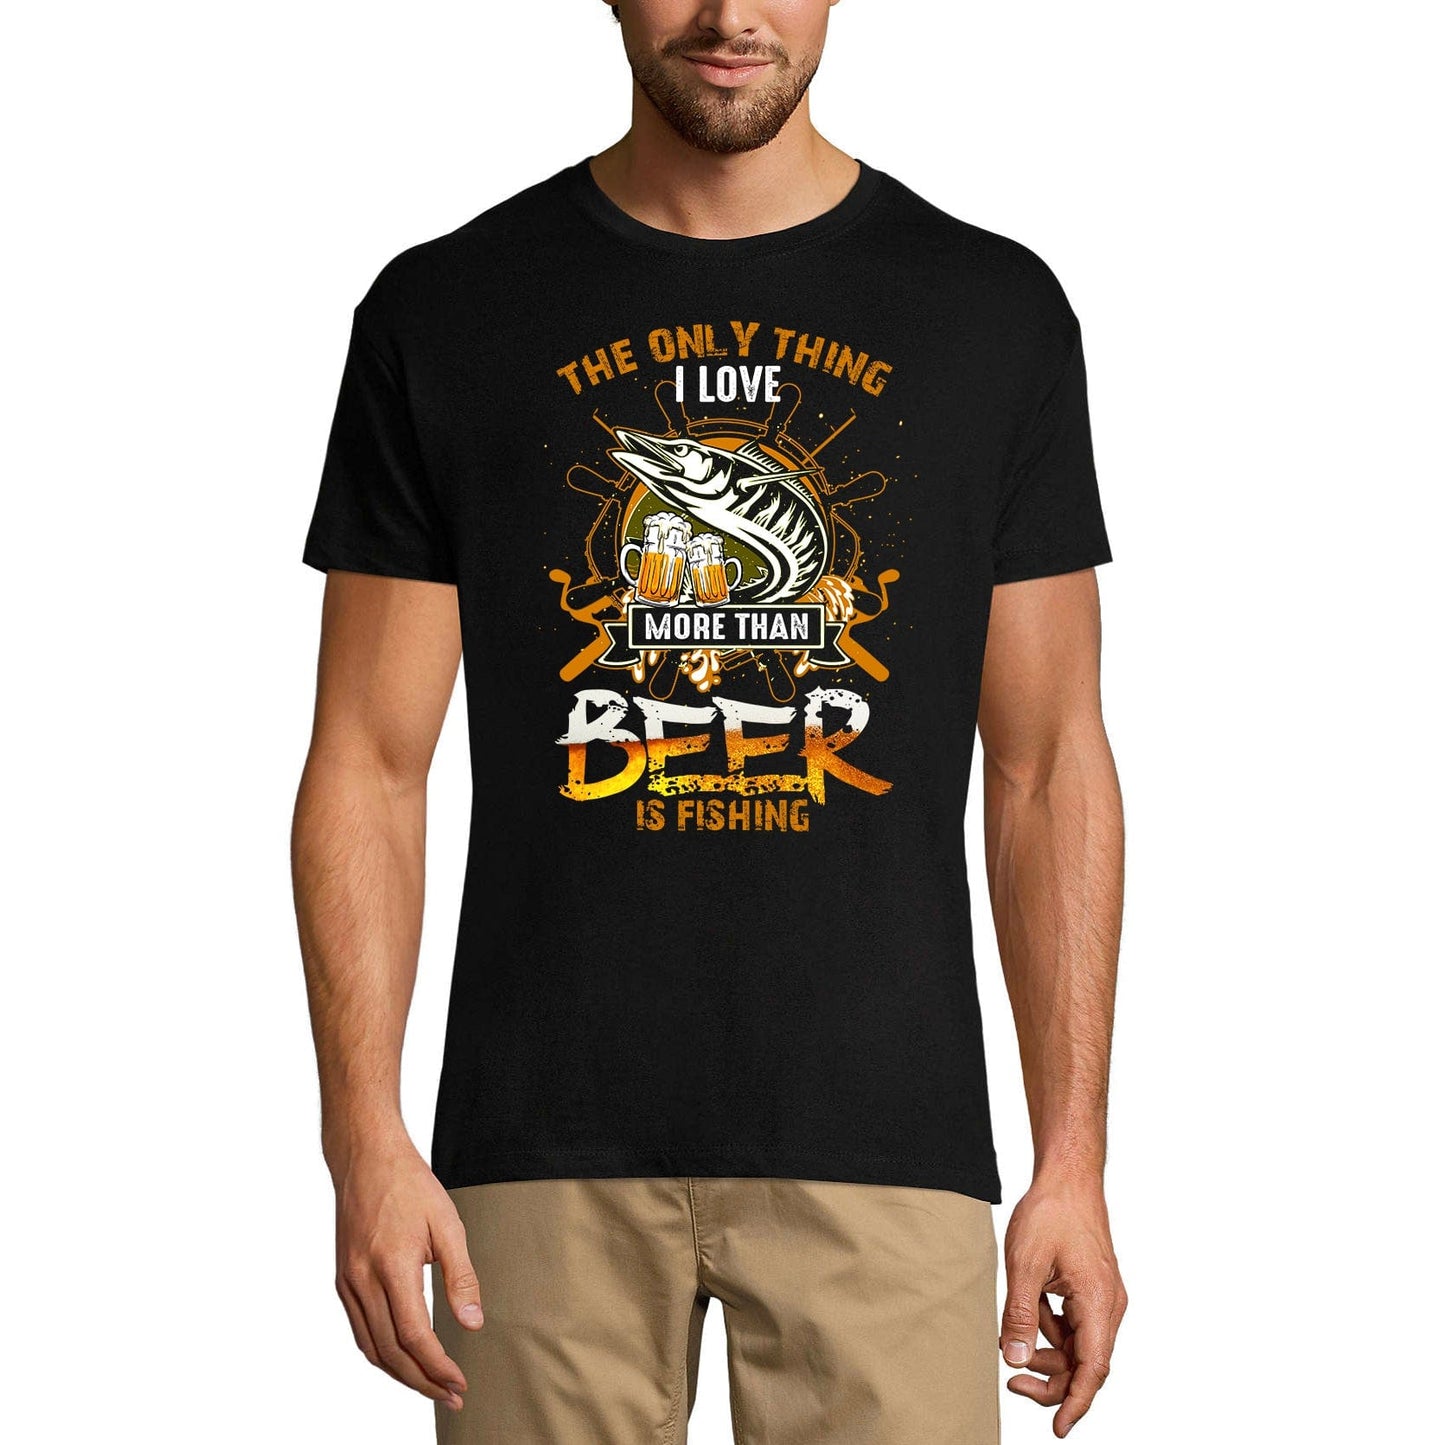 ULTRABASIC Men's T-Shirt Only Thing I Love More Than Beer is Fishing - Funny Fisherman Tee Shirt